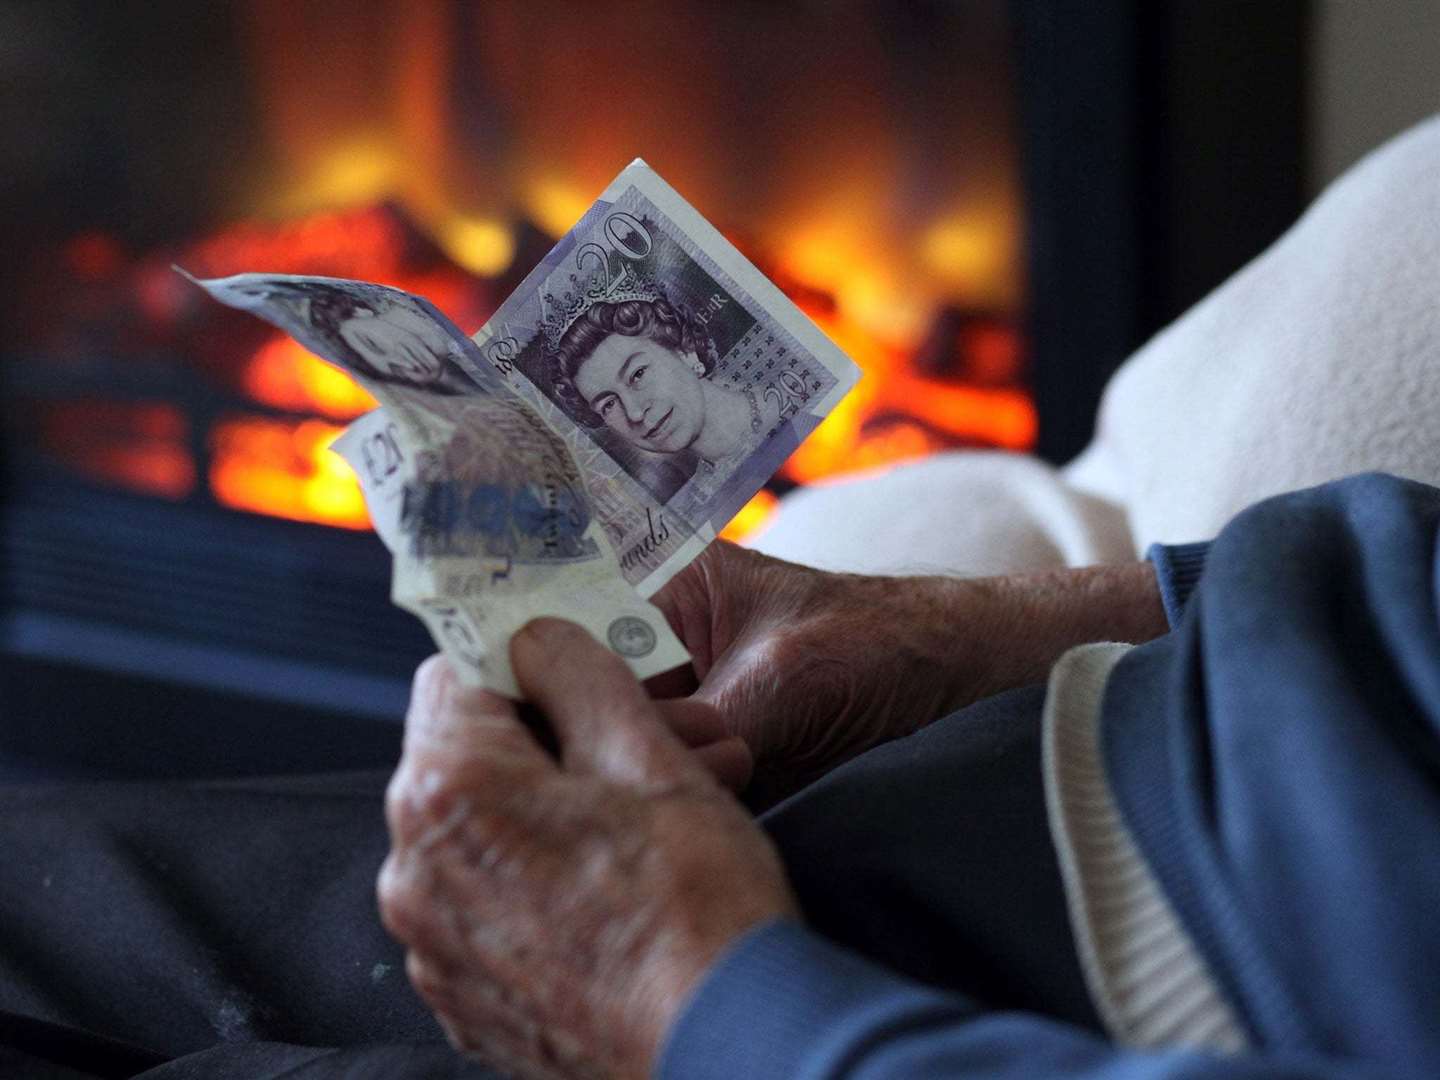 Age Scotland warns people will die unless governments take urgent preventative action to tackle fuel poverty.